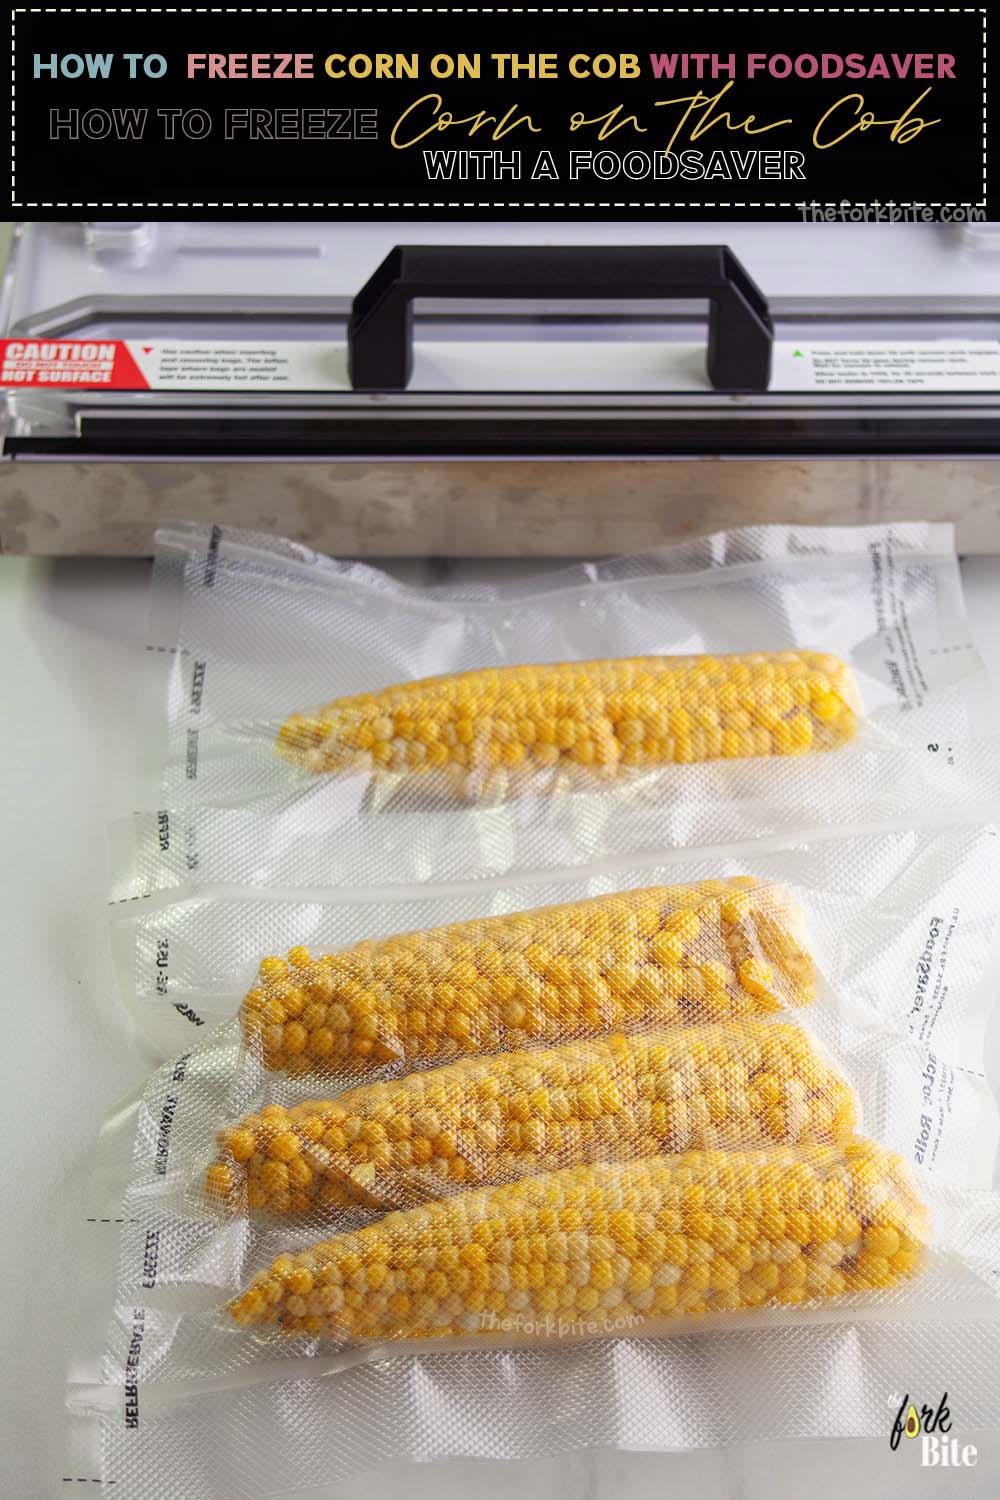 How to Freeze Corn on the Cob With a Foodsaver?